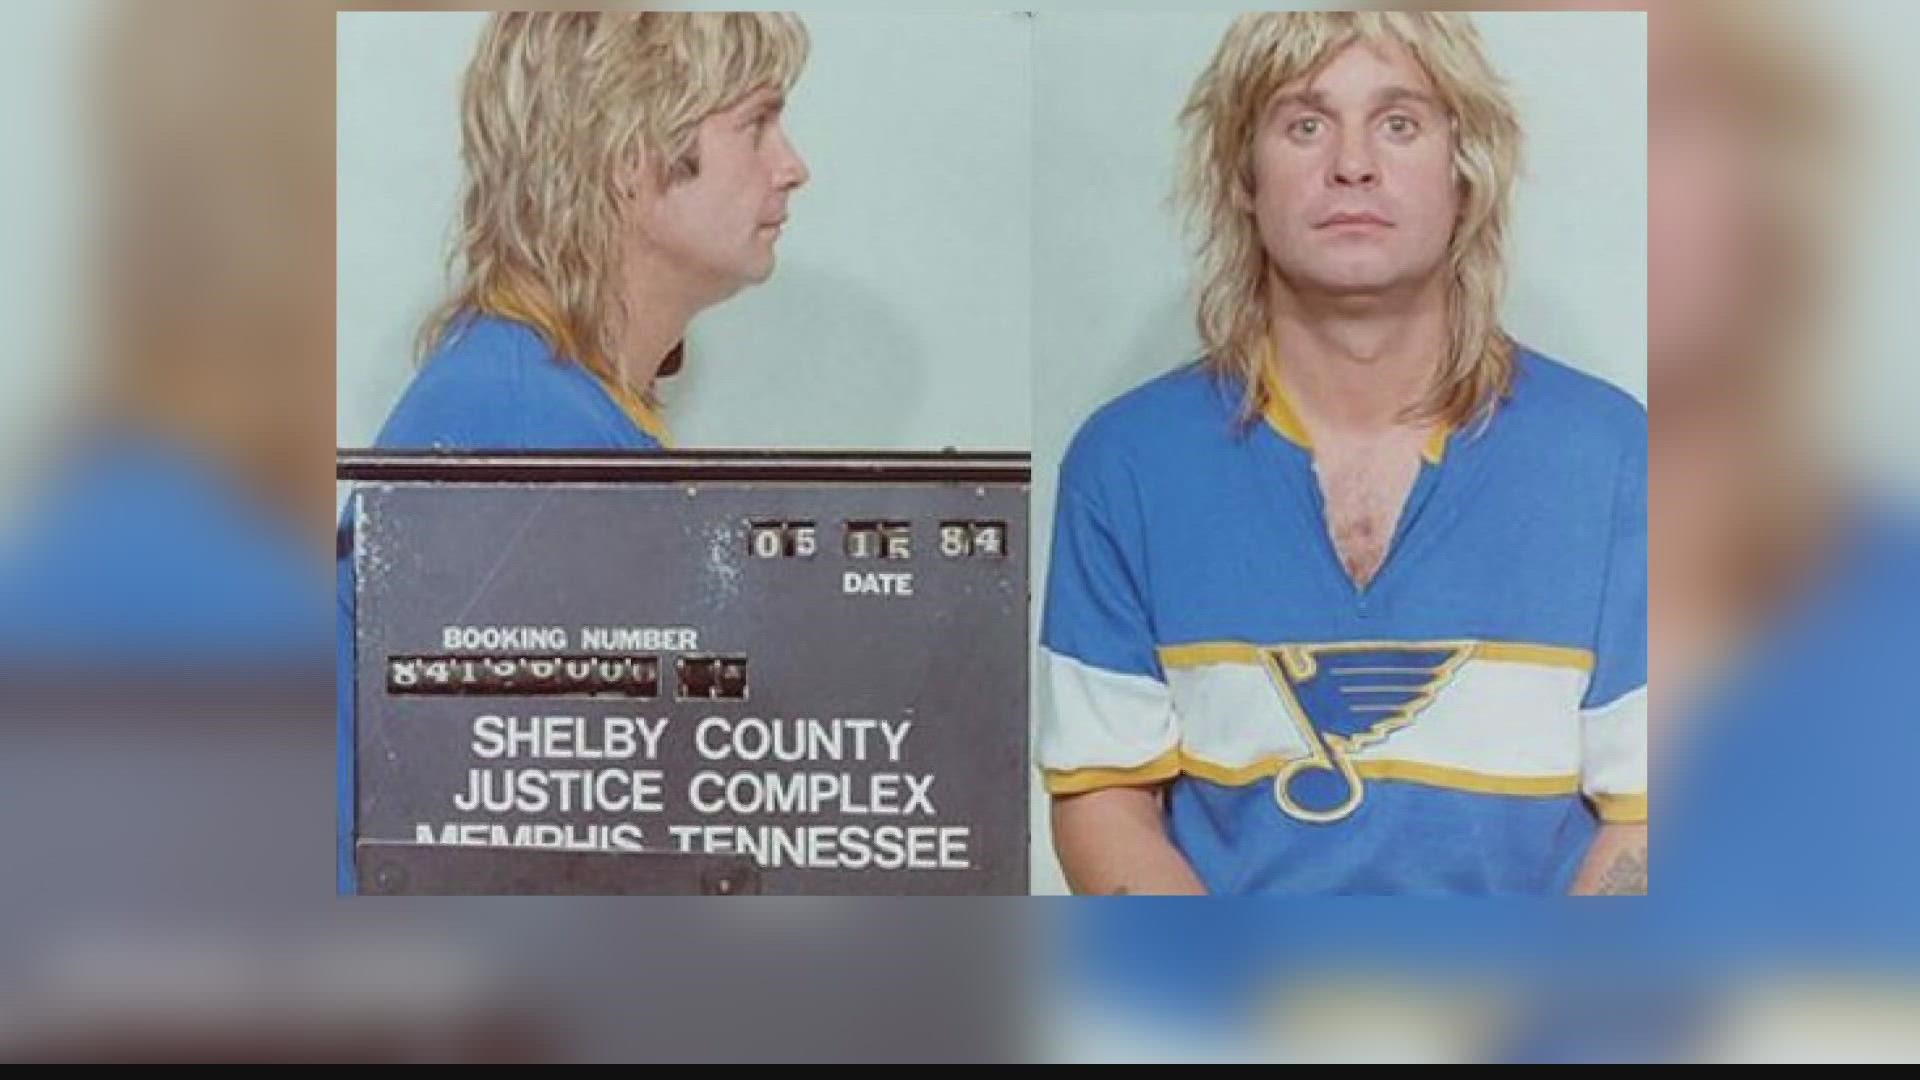 It's one of the most iconic pictures in St. Louis Blues history... and has almost nothing to do with them. Here's the story of how Ozzy became a local hockey legend.